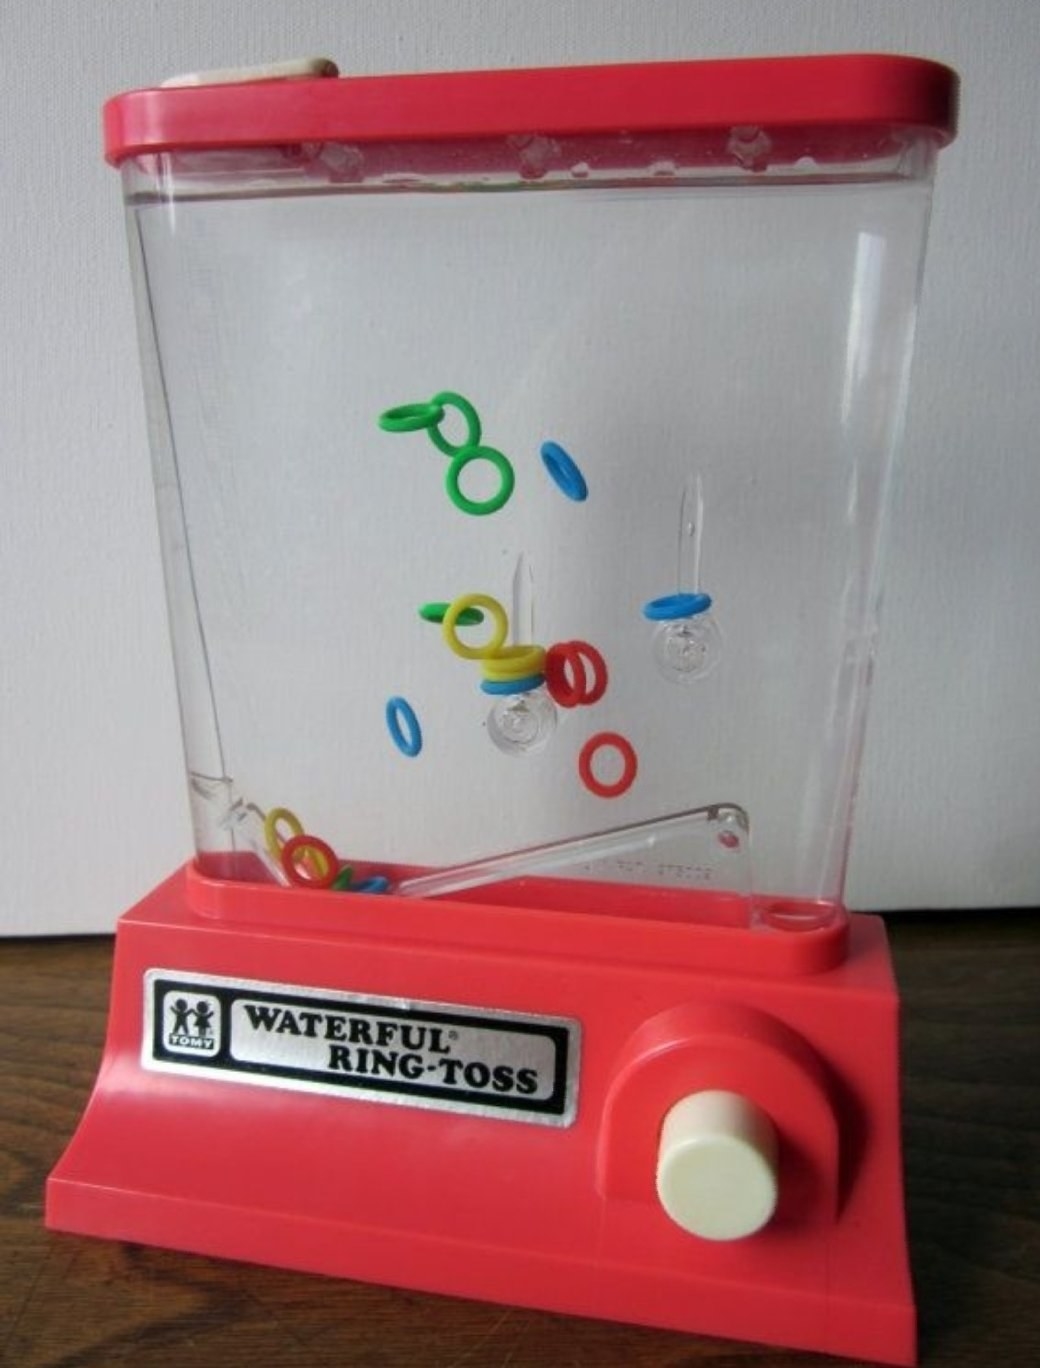 waterful ring toss game